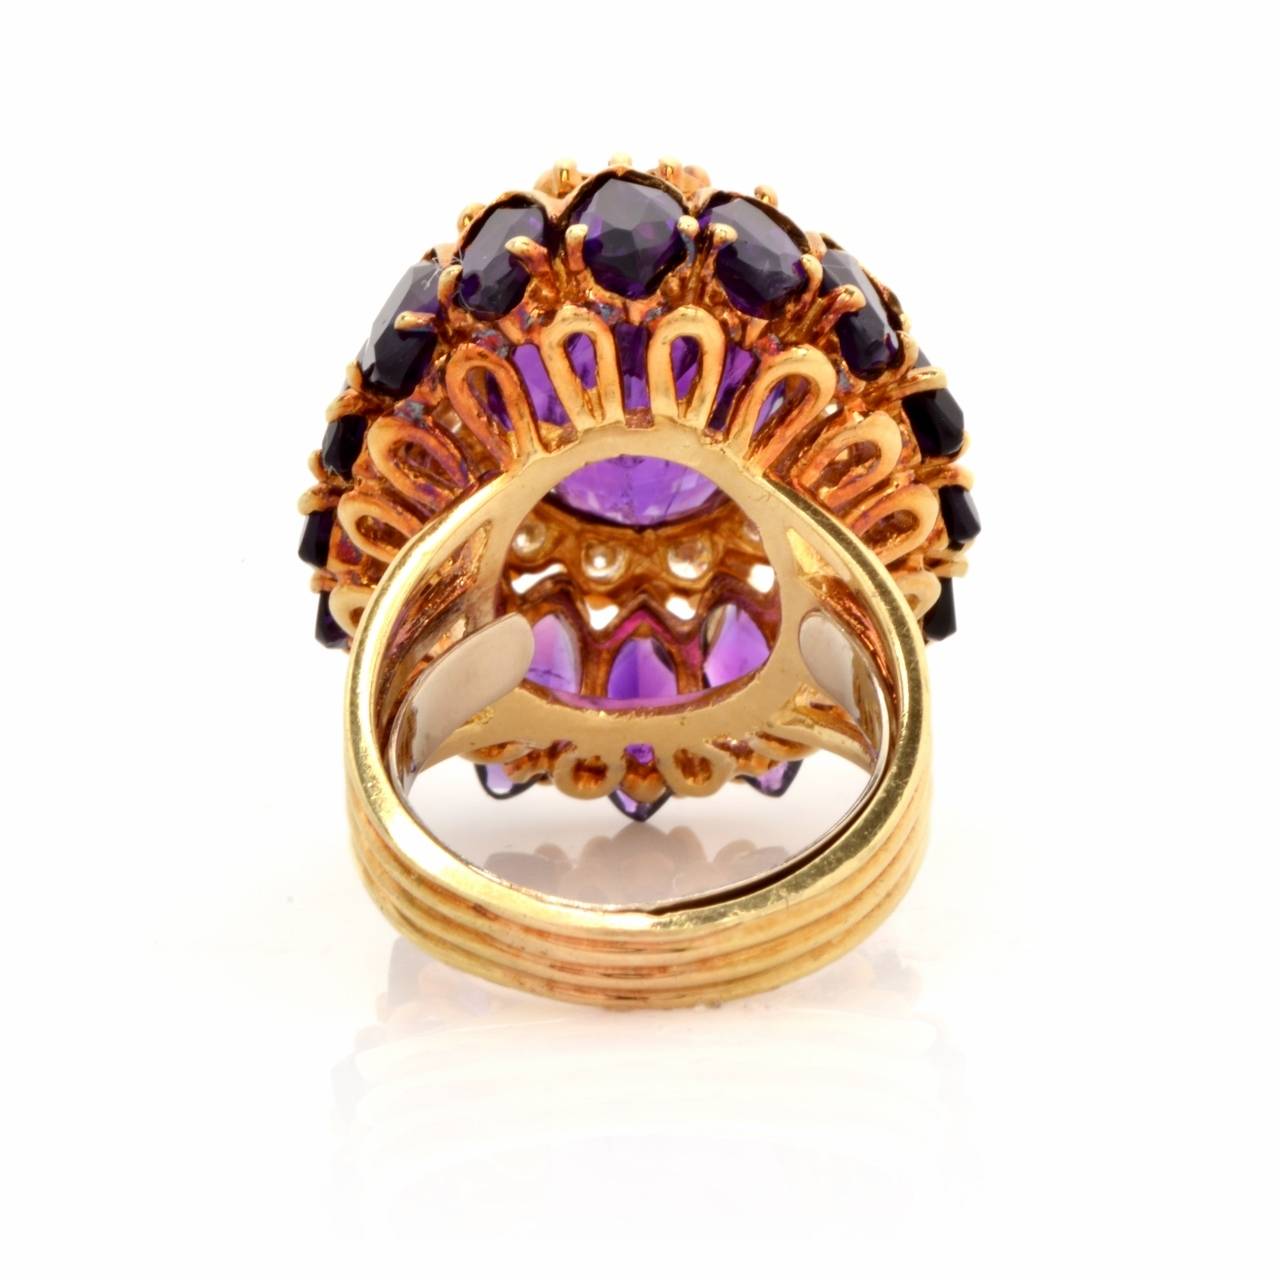 This astonishing vintage Retro cocktail ring of elaborate design and immaculate workmanship is crafted in 18K yellow gold, weighing 18.8 grams and measuring 30 mm x 25 mm x 15 mm. Artfully designed as a multiple  layer ovular plaque., this